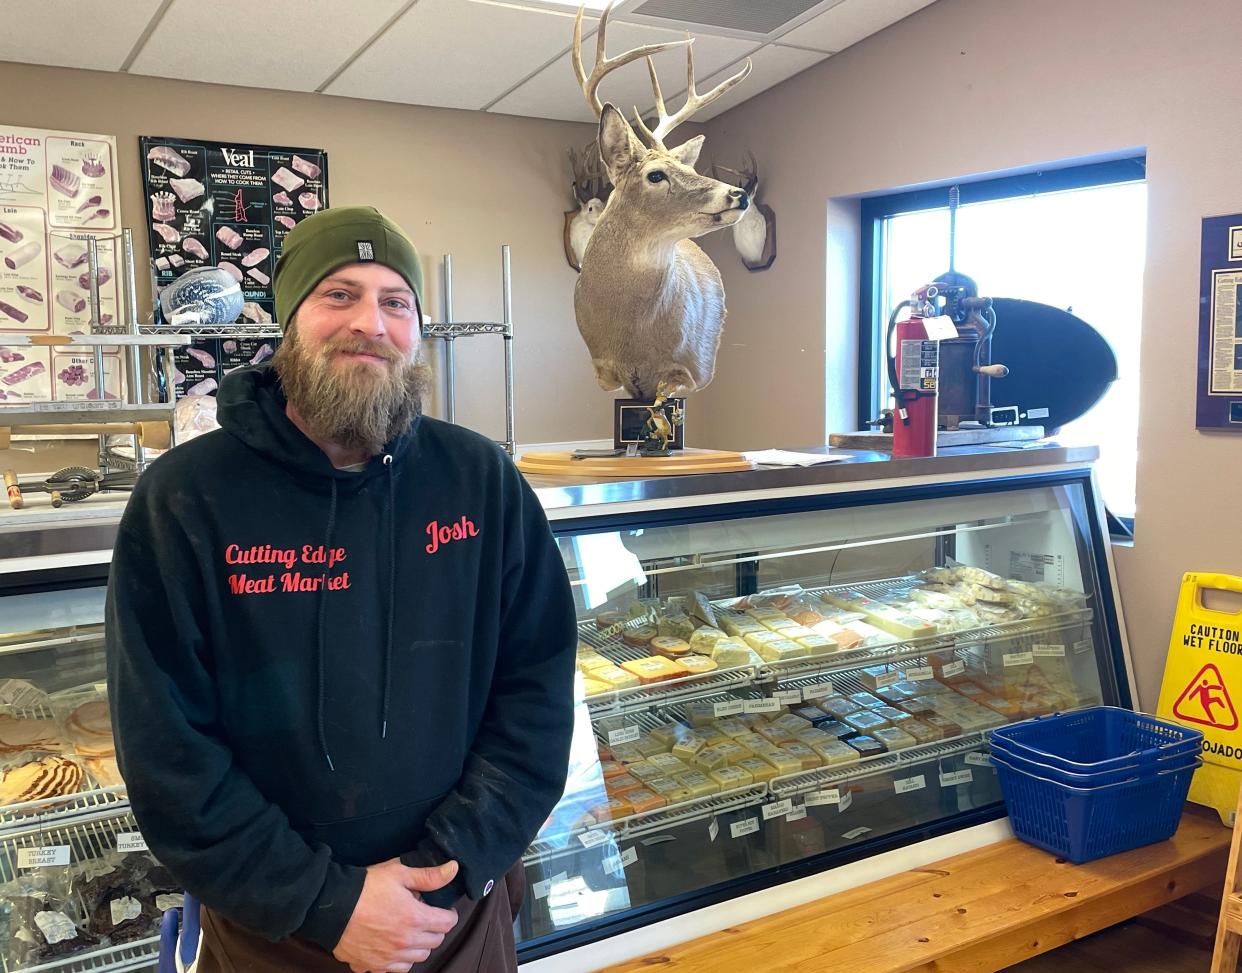 Cutting Edge Meat Market in Piedmont, S.D., is committed to providing hunters the service of processing their meat from the whole carcass, which is becoming more rare.